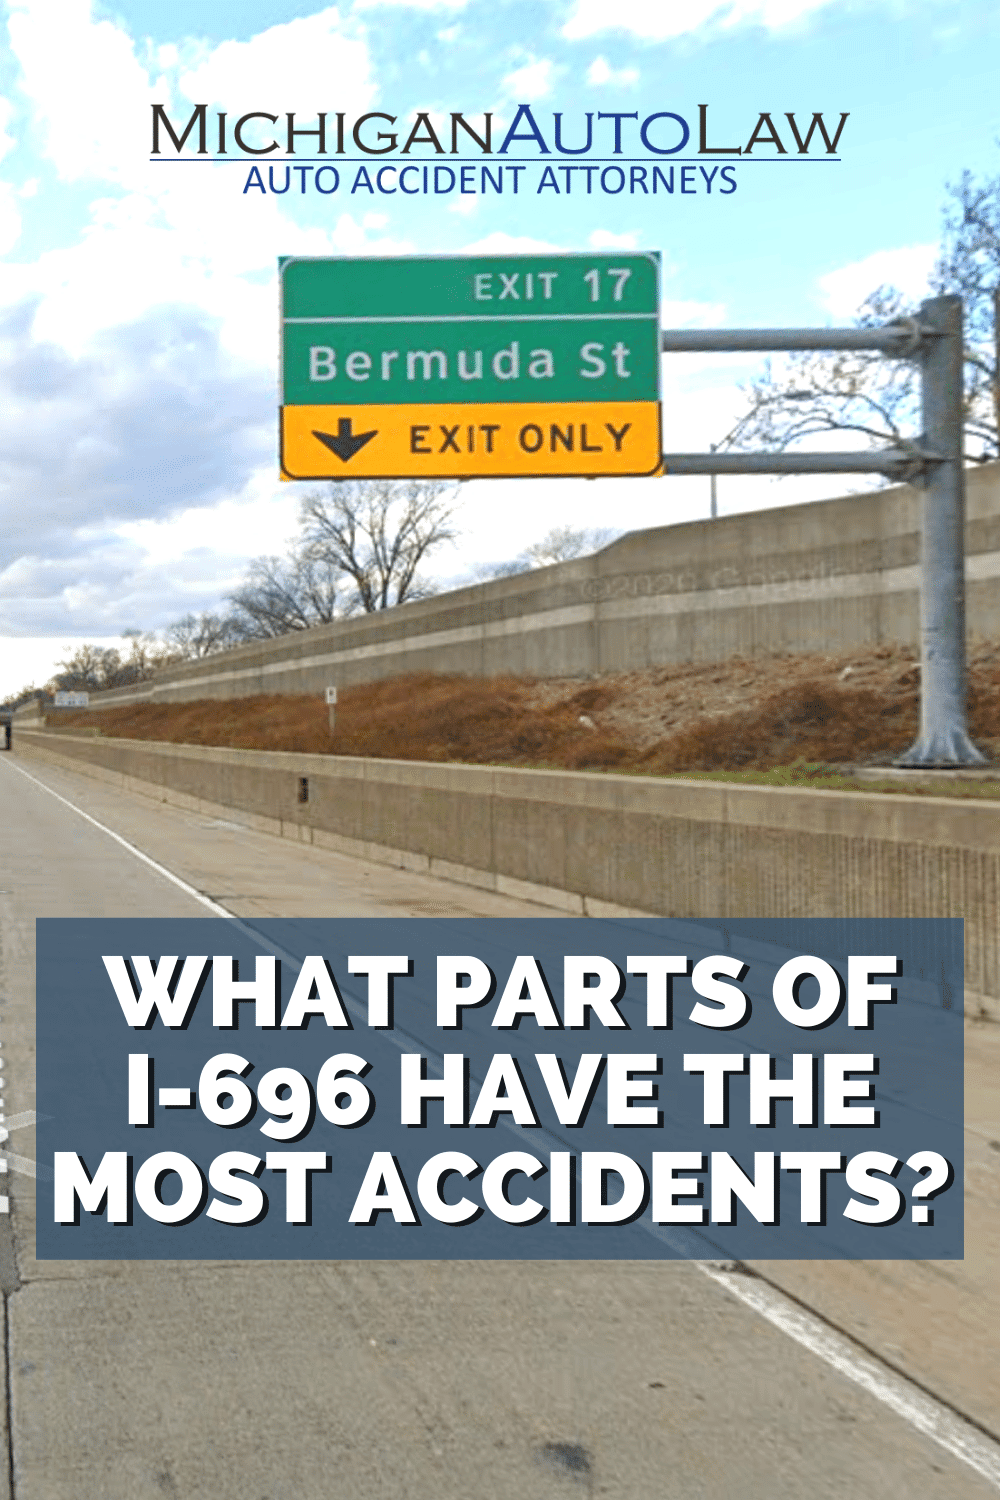 I-696 Car Accidents In Michigan: What Stretches Are The Most Dangerous?